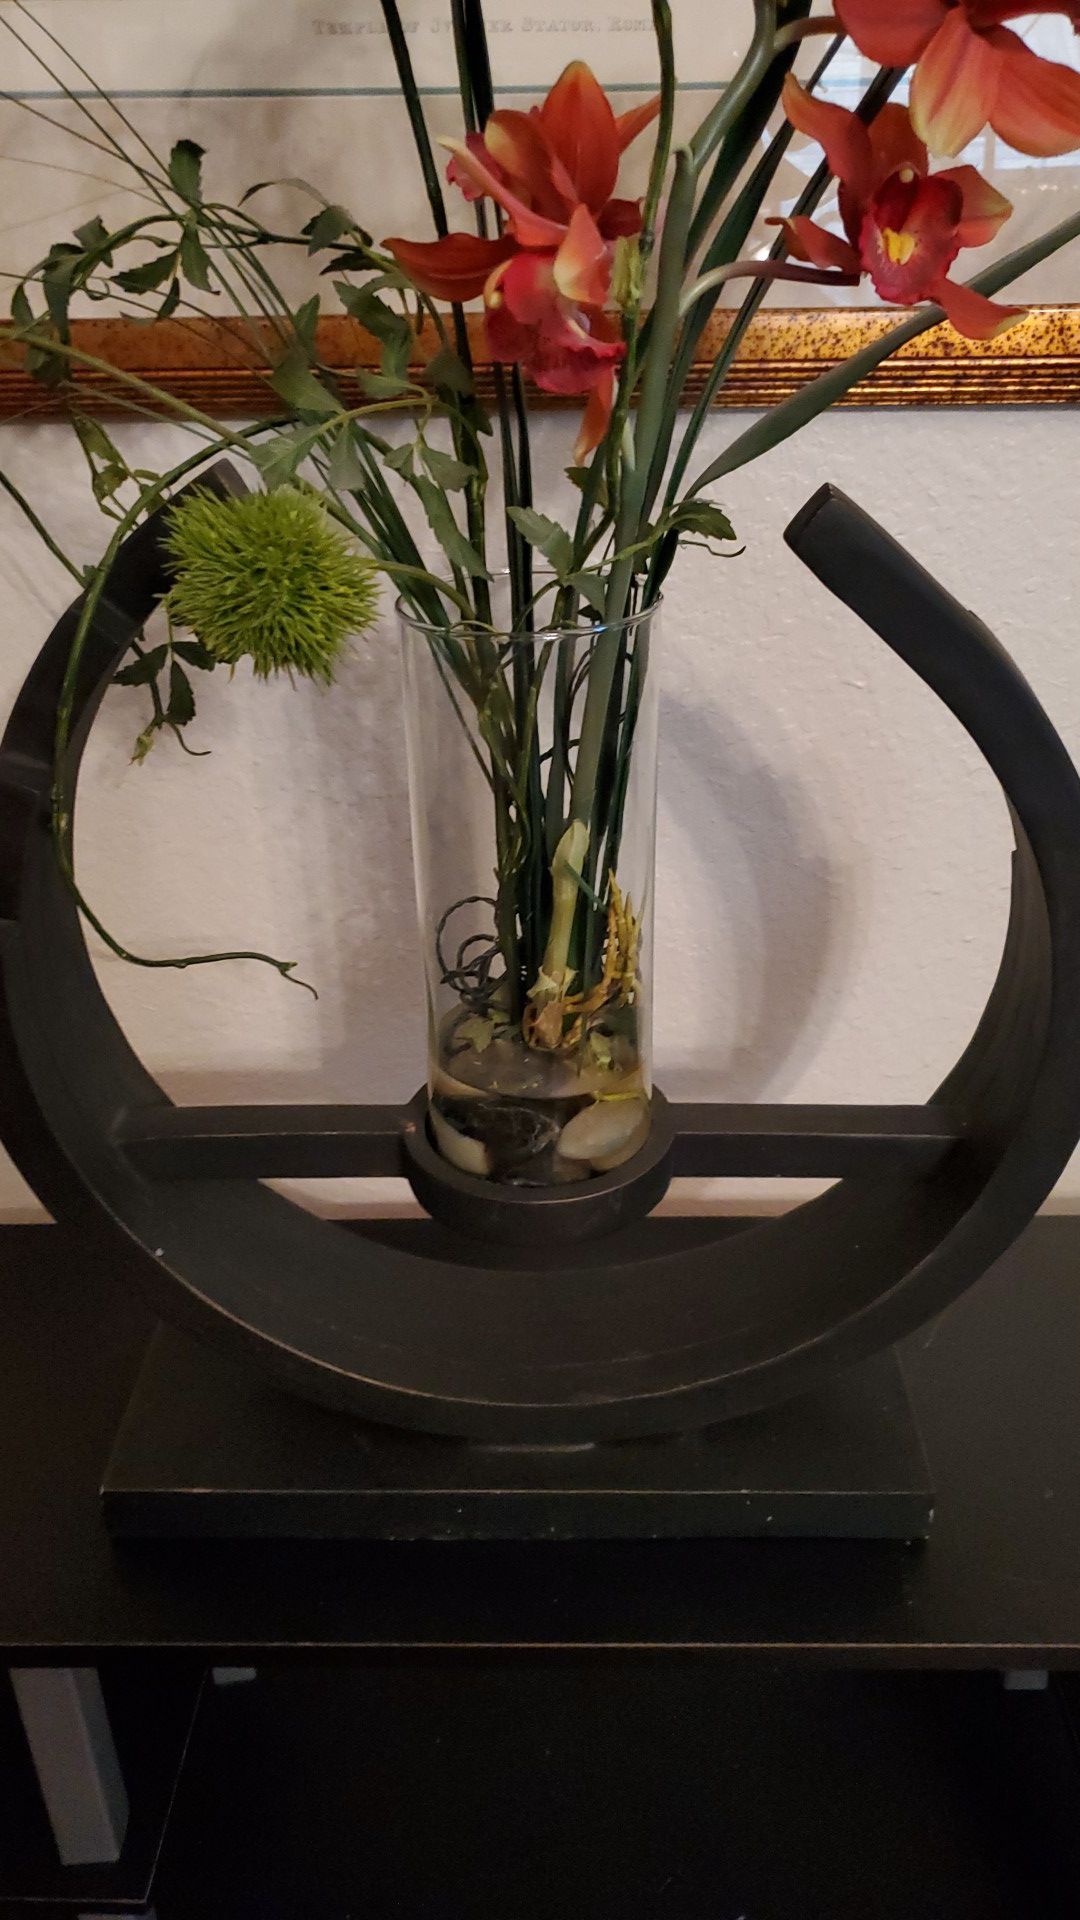 Wooden vase holder with flowers and vase